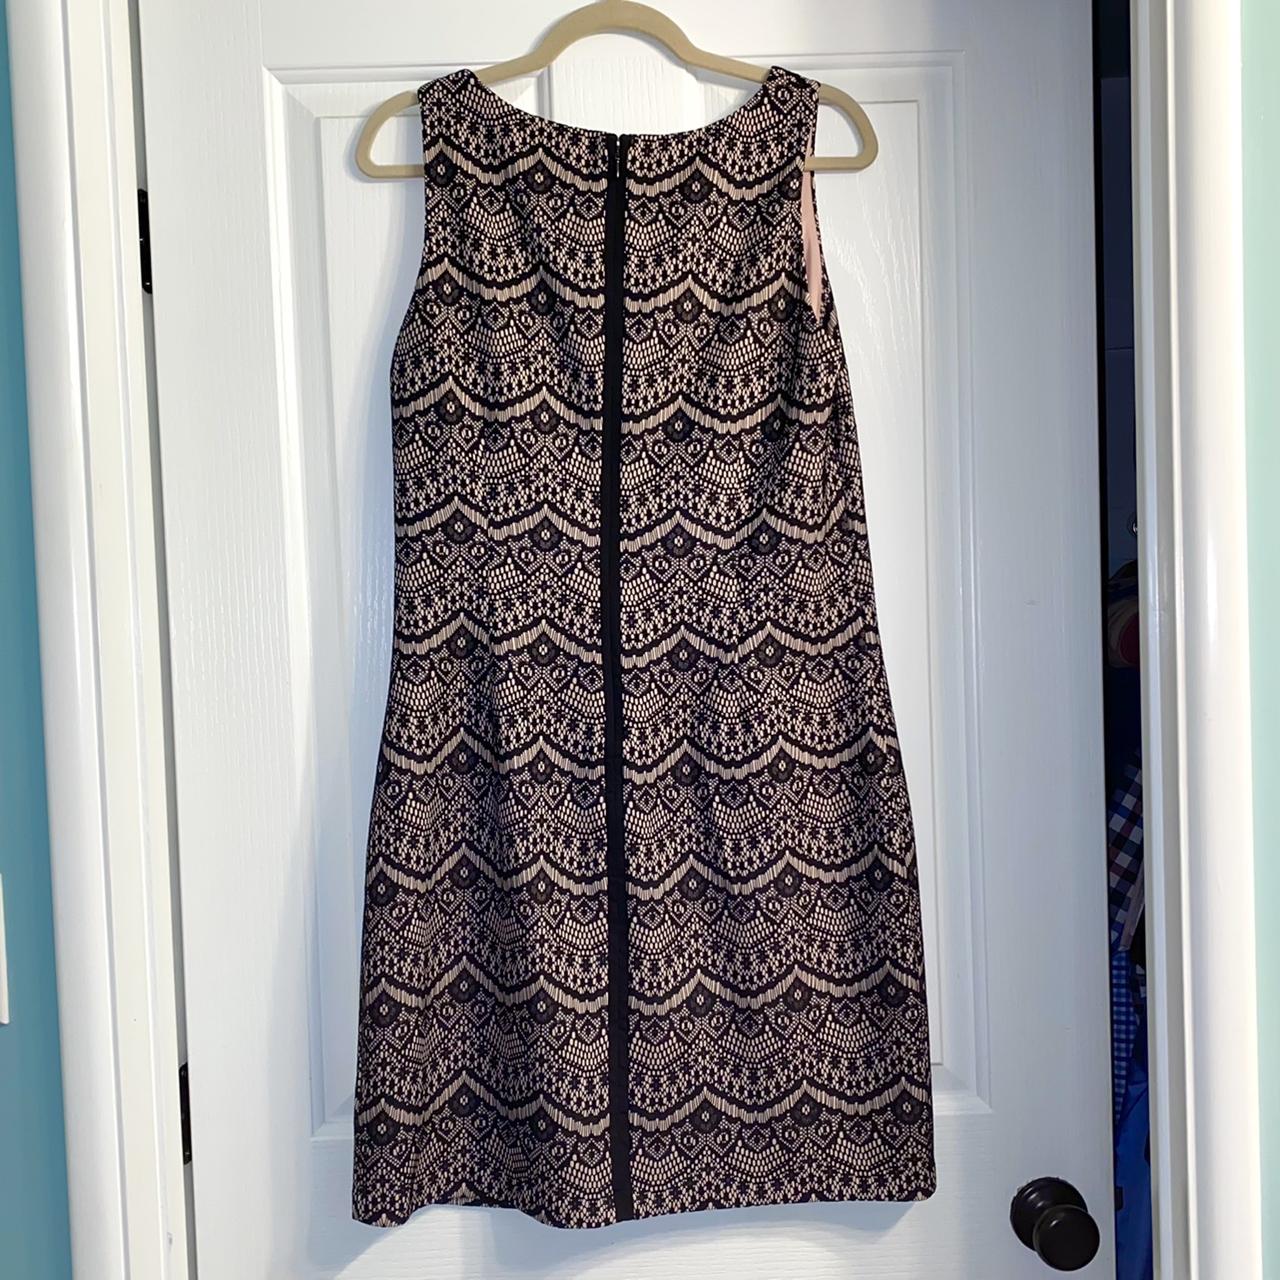 Guess Women's Black and Cream Dress (3)